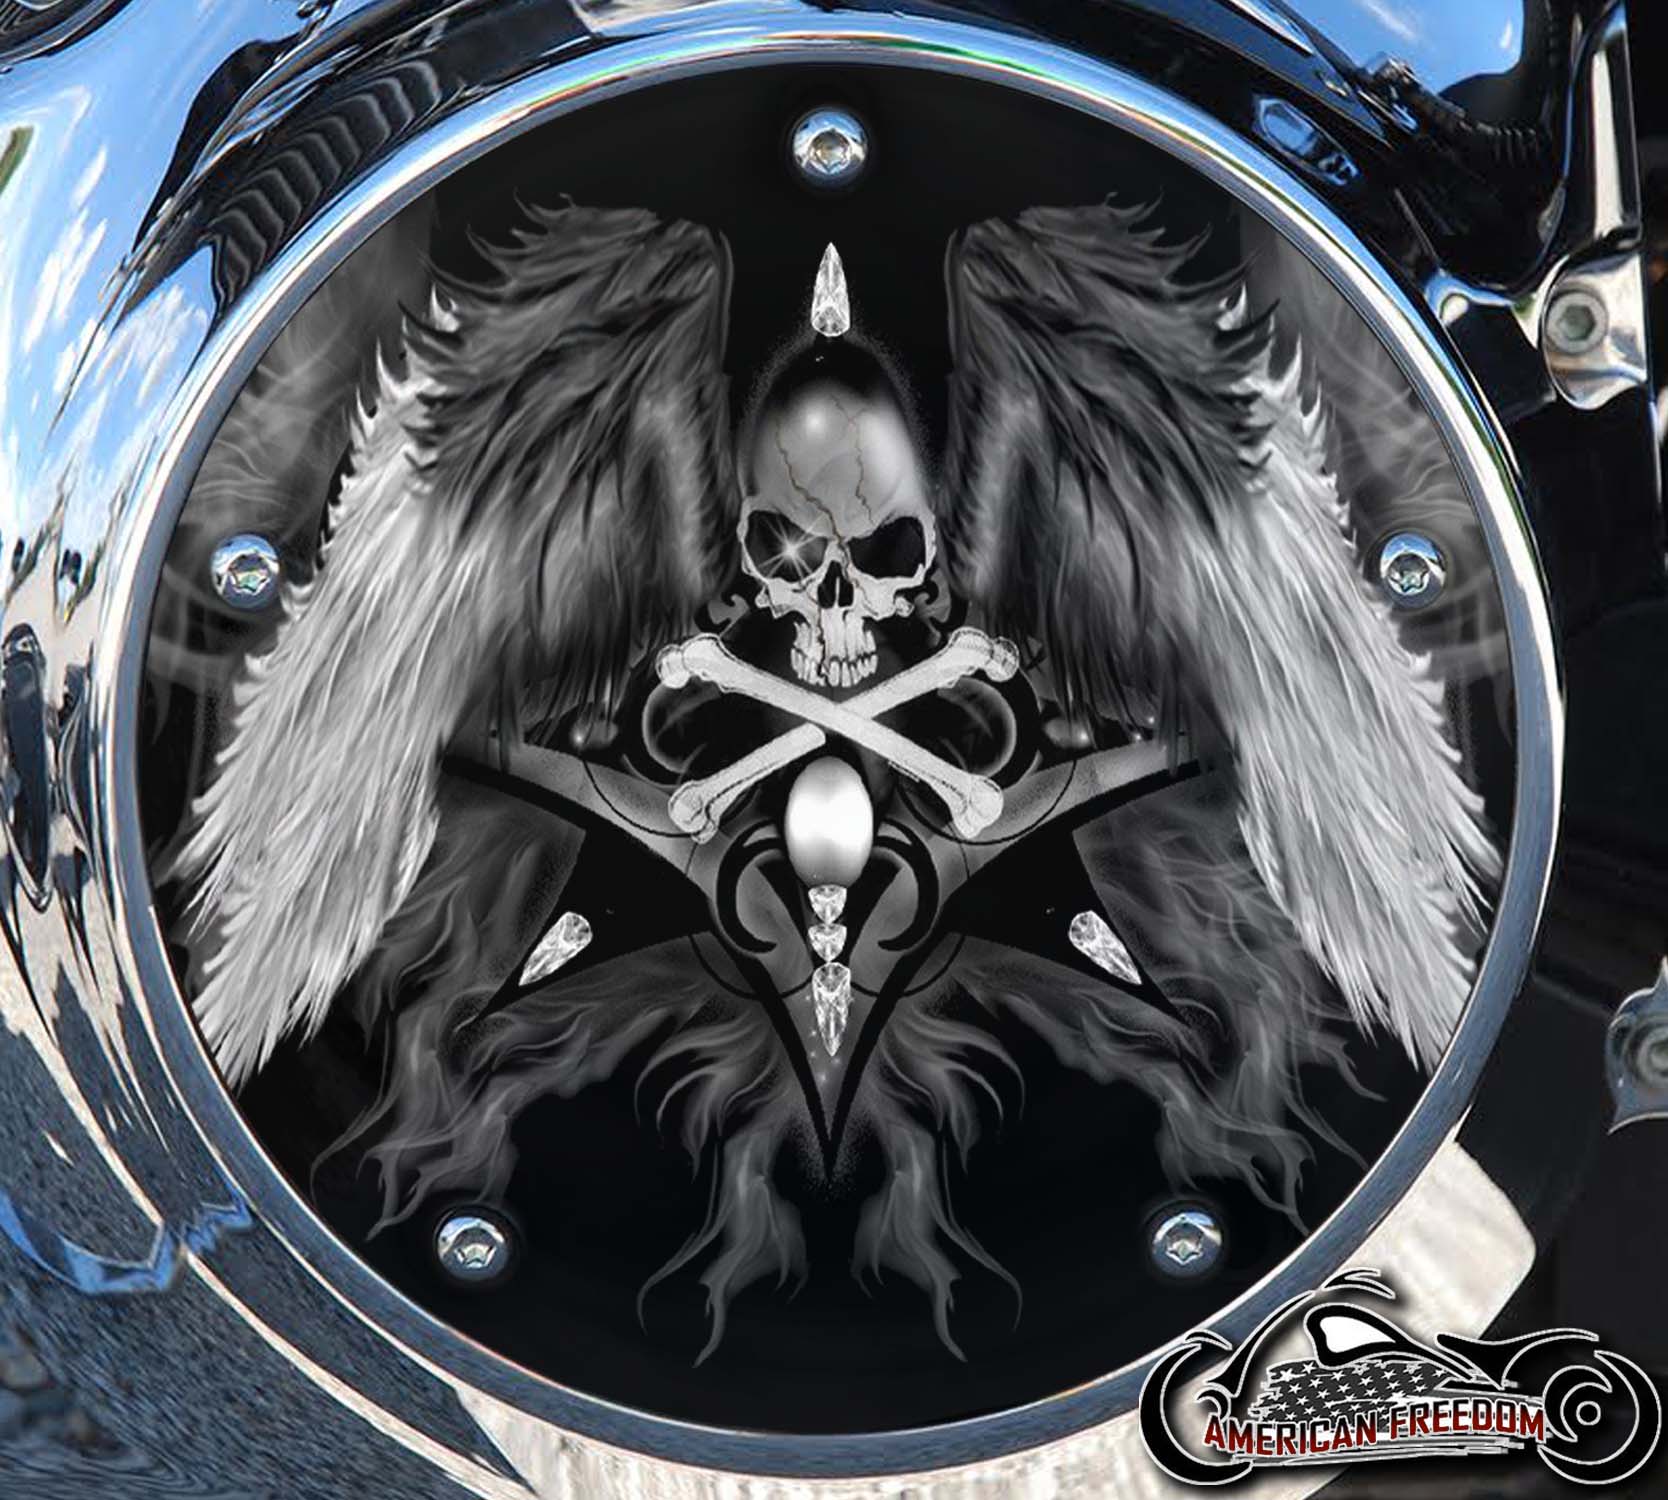 Custom Derby Cover - Skull With Wings [Harley Davidson Derby Cover 